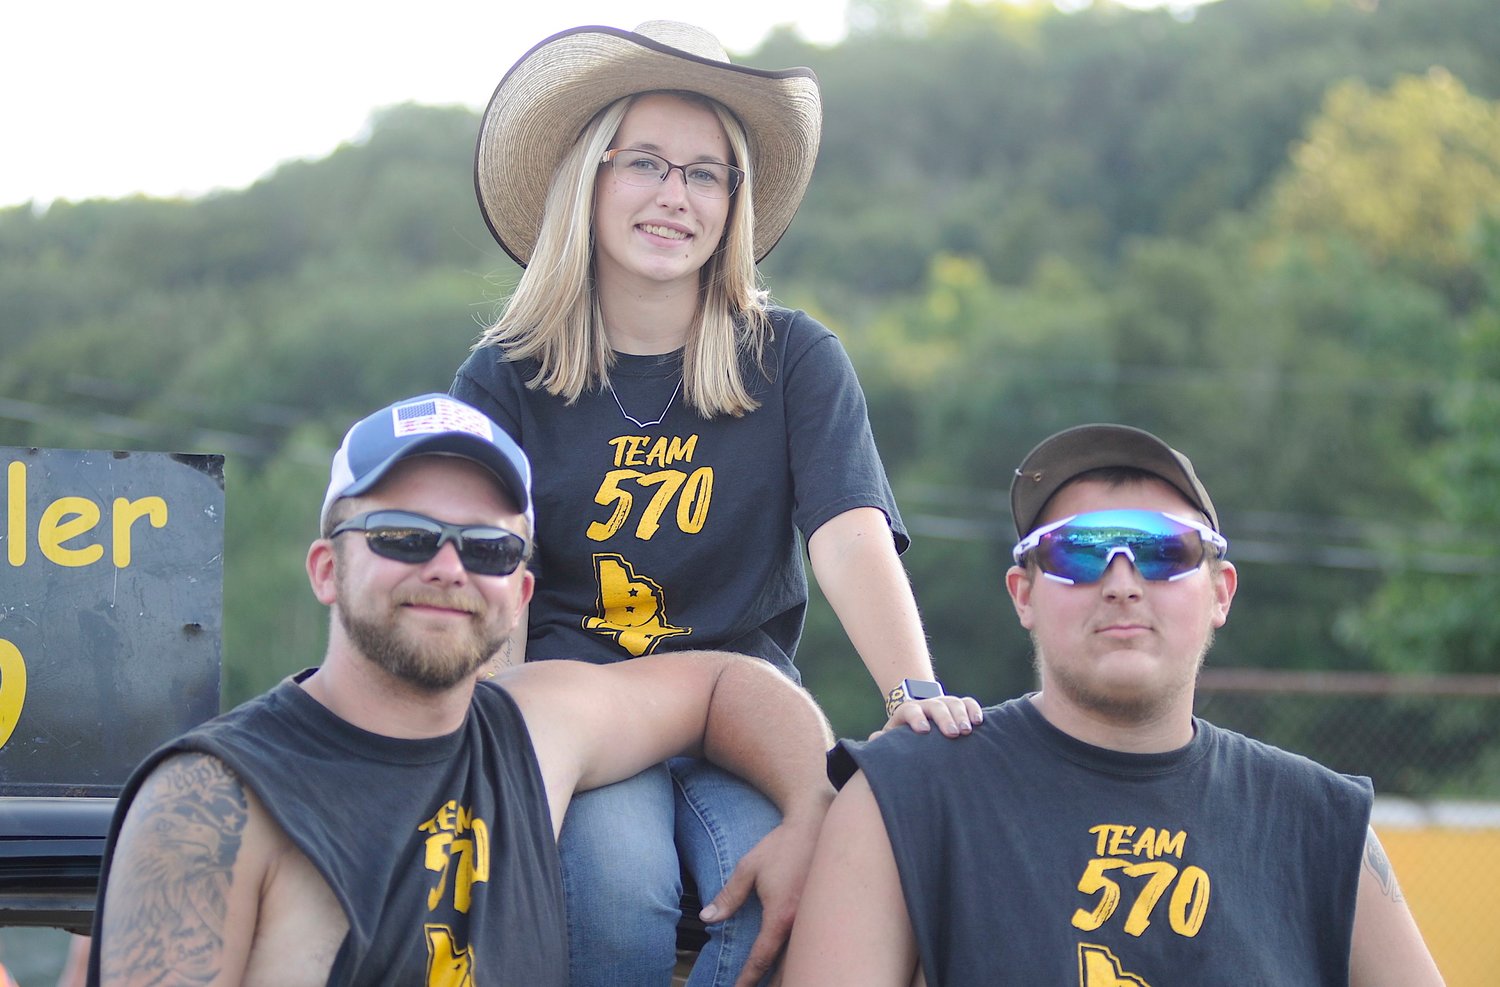 Riding high. Team 570 members and residents of Equinunk, PA, Johnny Smith and Johnathon Chrisler, pose with demo driver Kylie Chrisler...